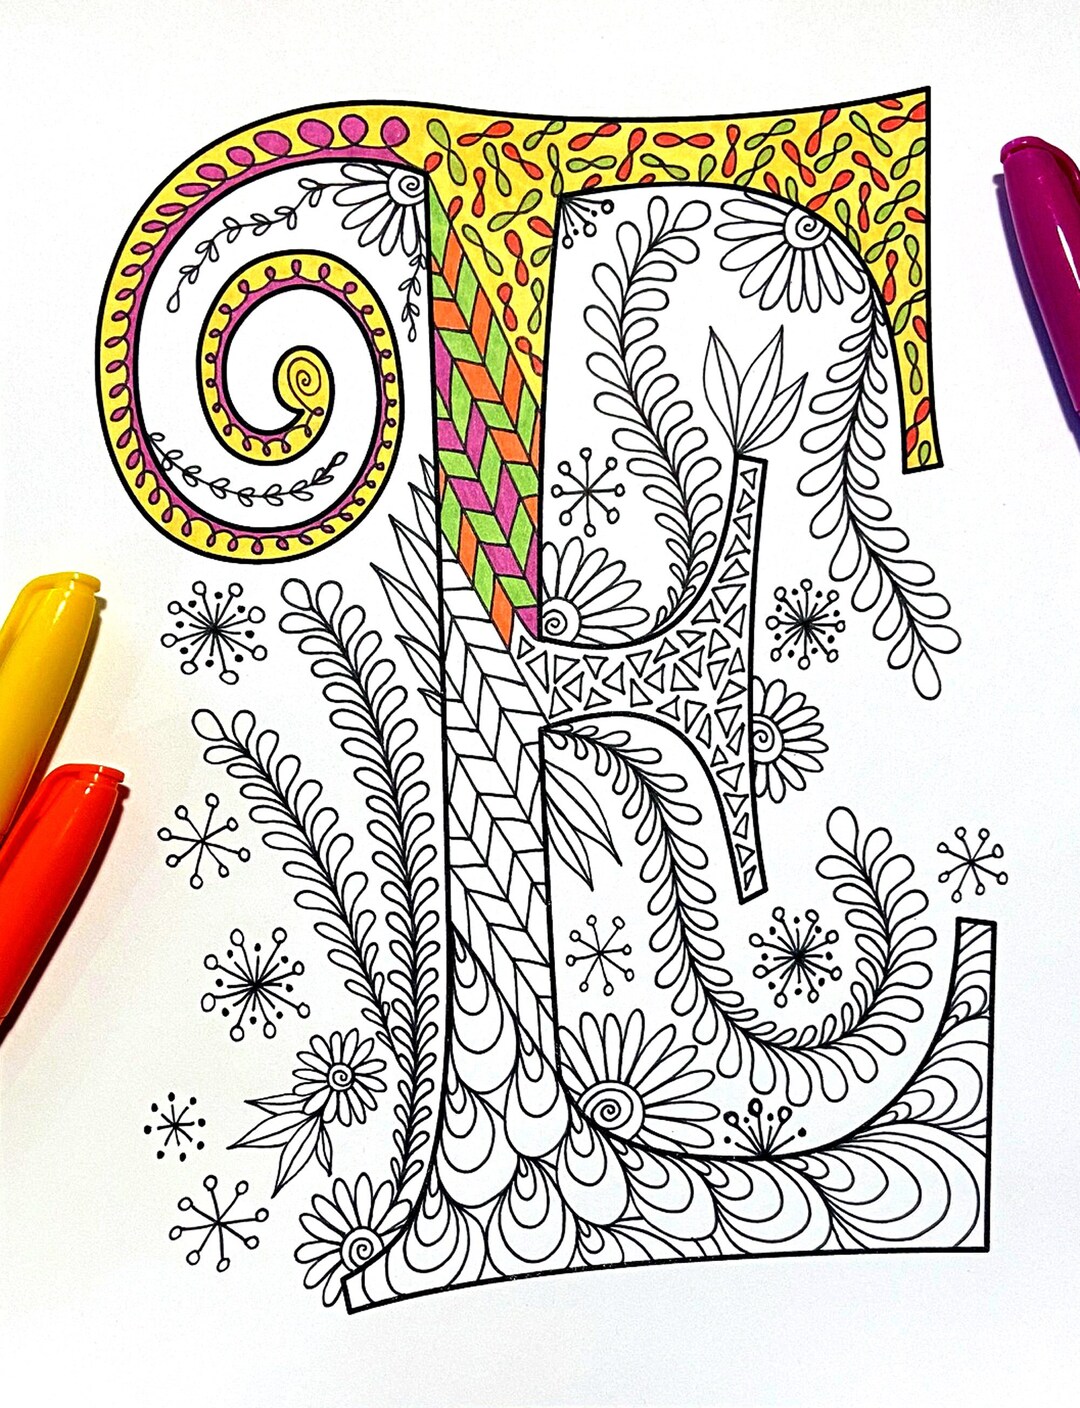 Retro Floral Letter E Coloring Page Inspired by the Font - Etsy